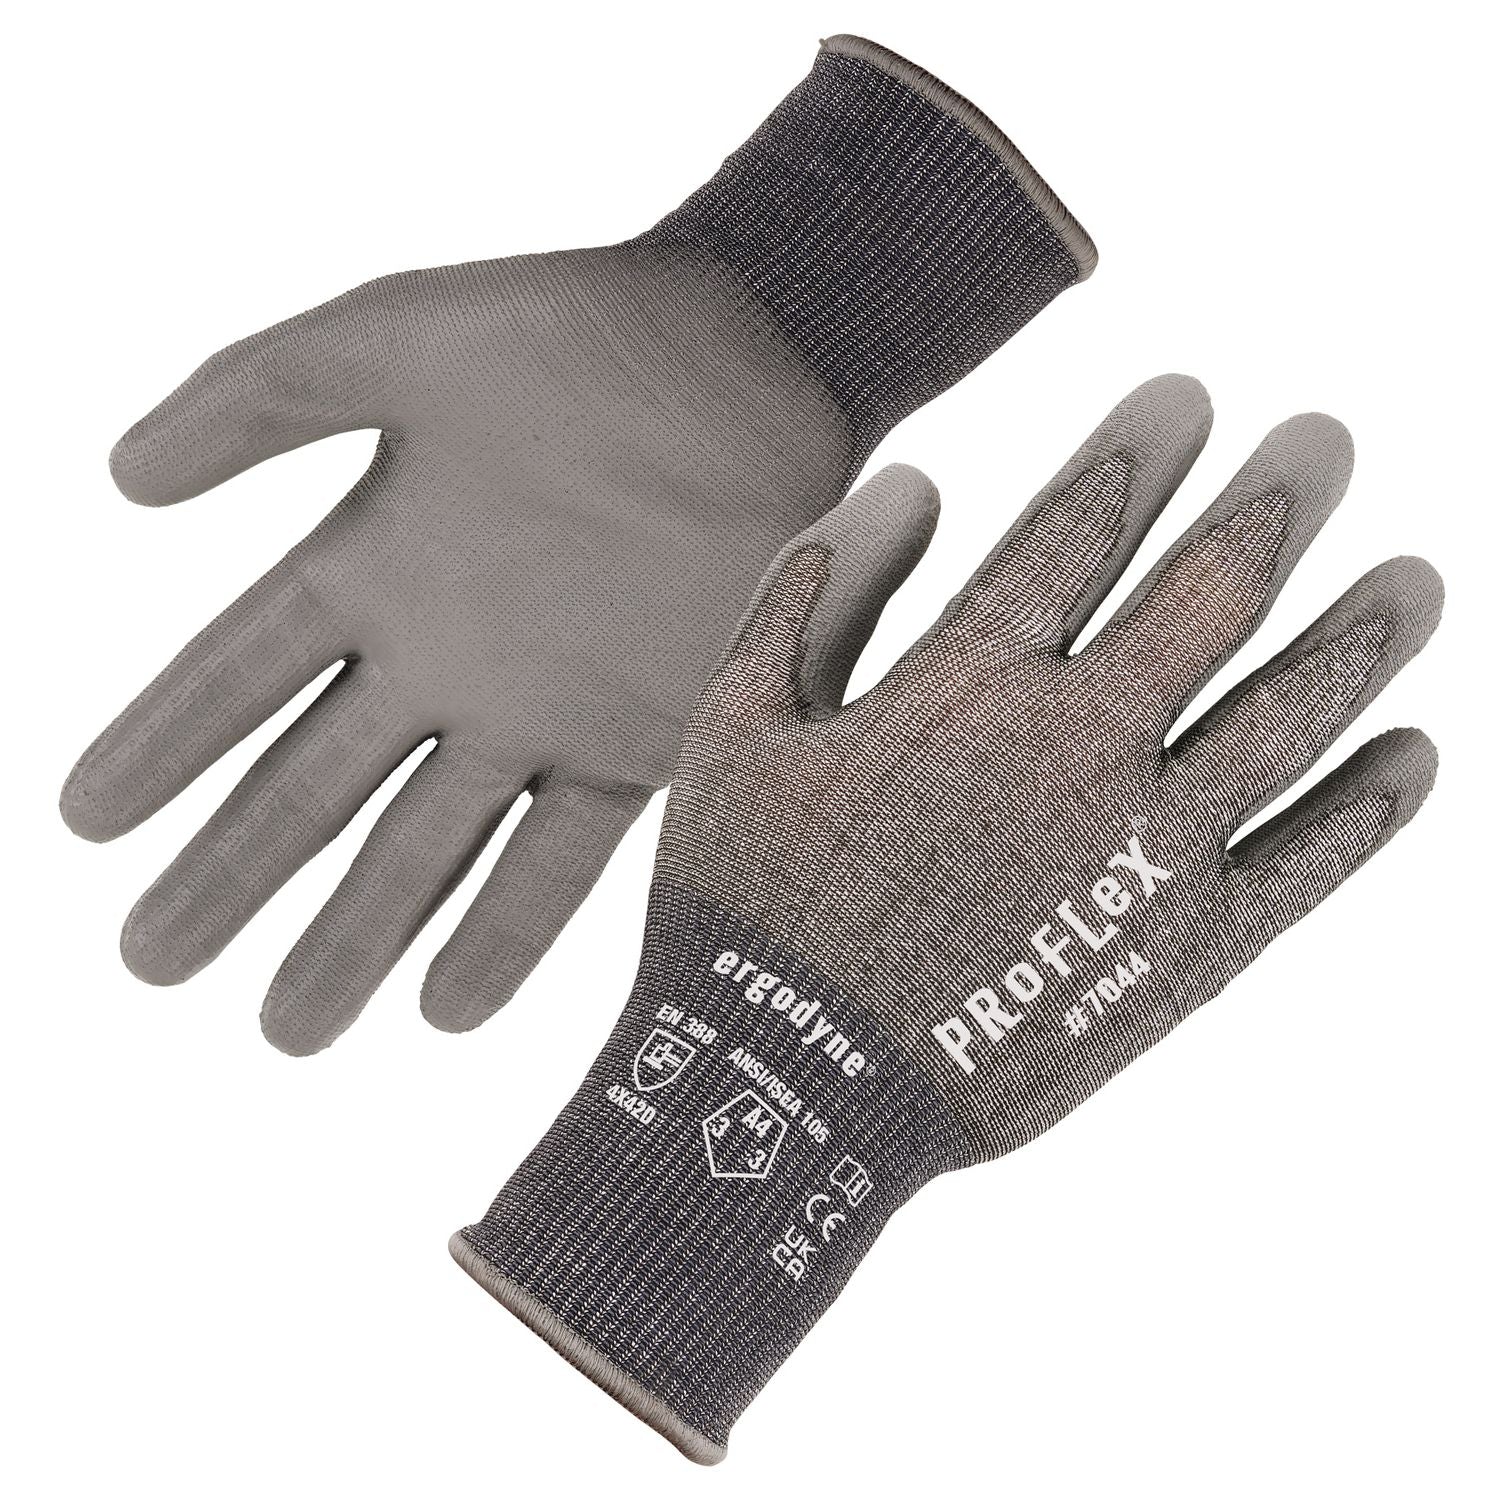 proflex-7044-ansi-a4-pu-coated-cr-gloves-gray-x-small-pair-ships-in-1-3-business-days_ego10491 - 1